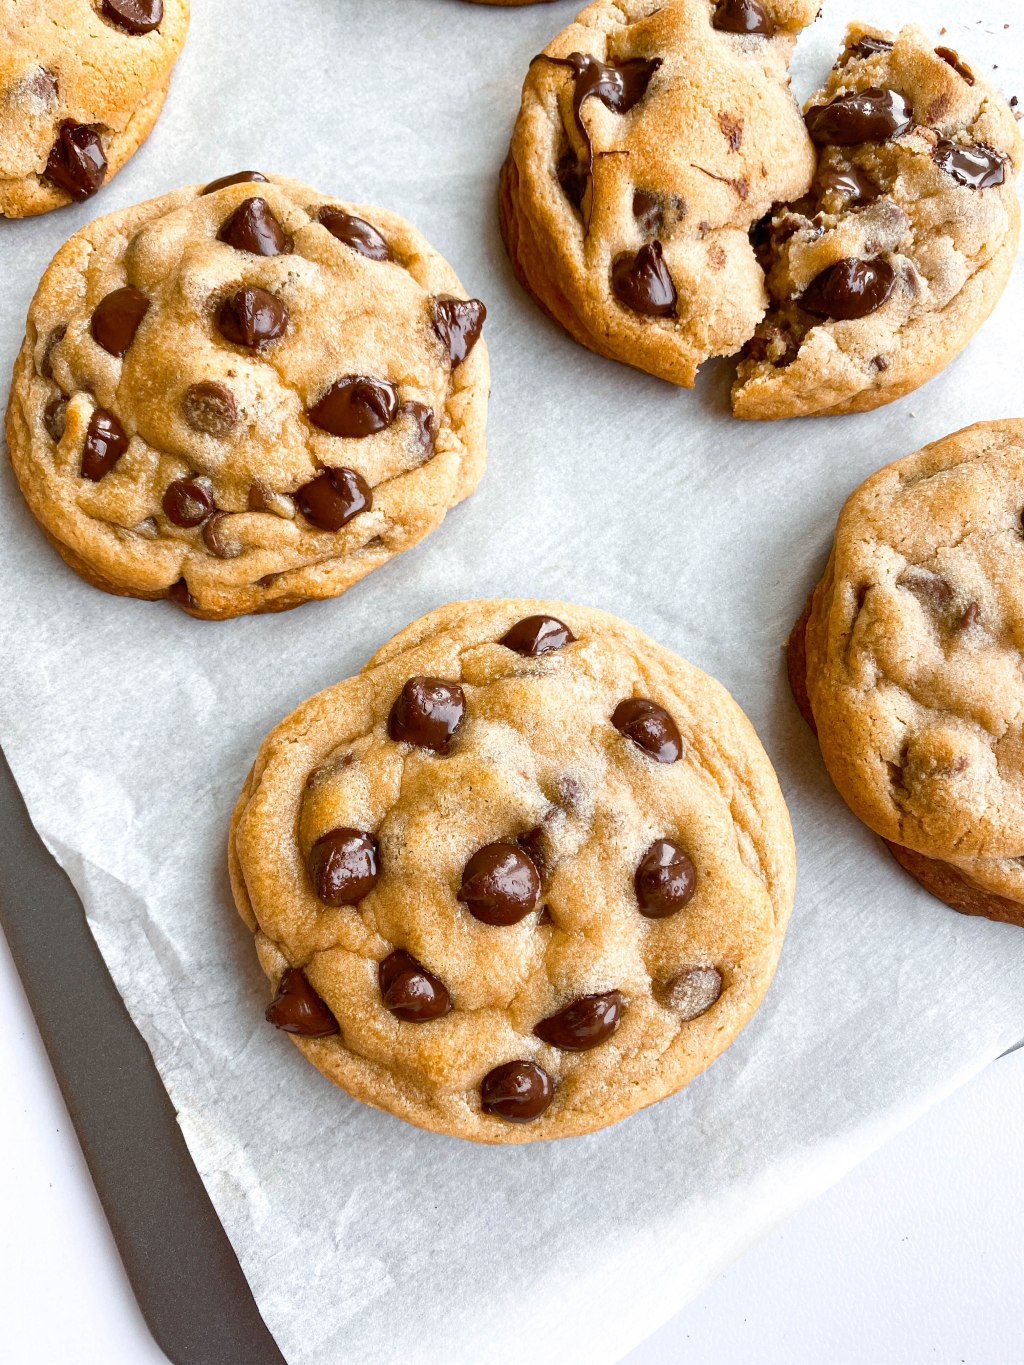 The Thickest and Gooiest Chocolate Chip Cookies